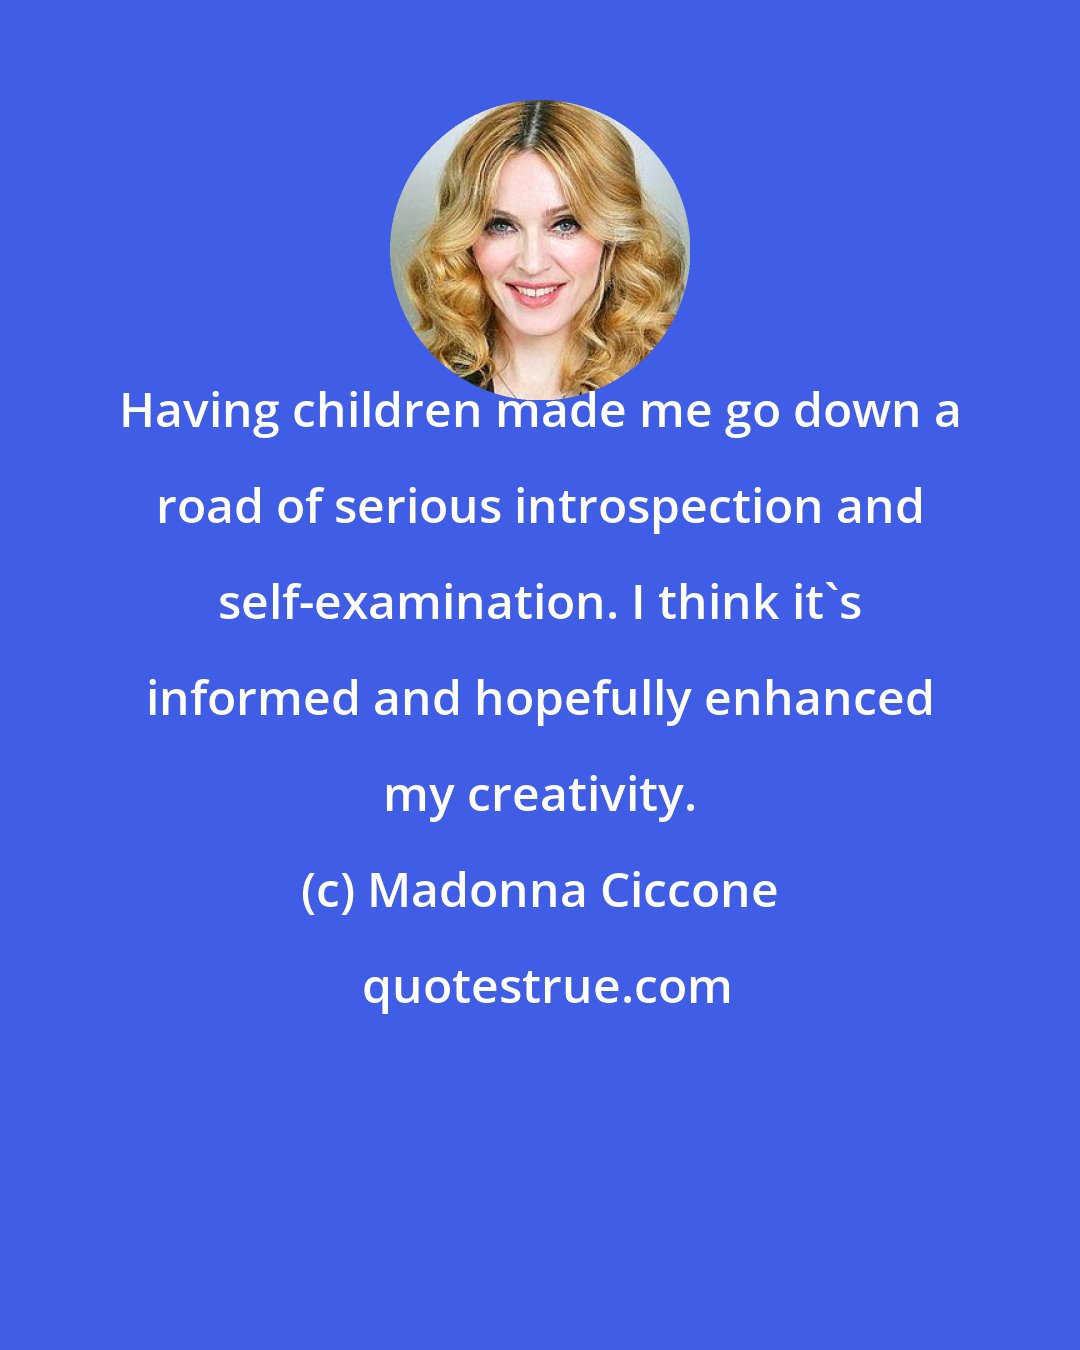 Madonna Ciccone: Having children made me go down a road of serious introspection and self-examination. I think it's informed and hopefully enhanced my creativity.